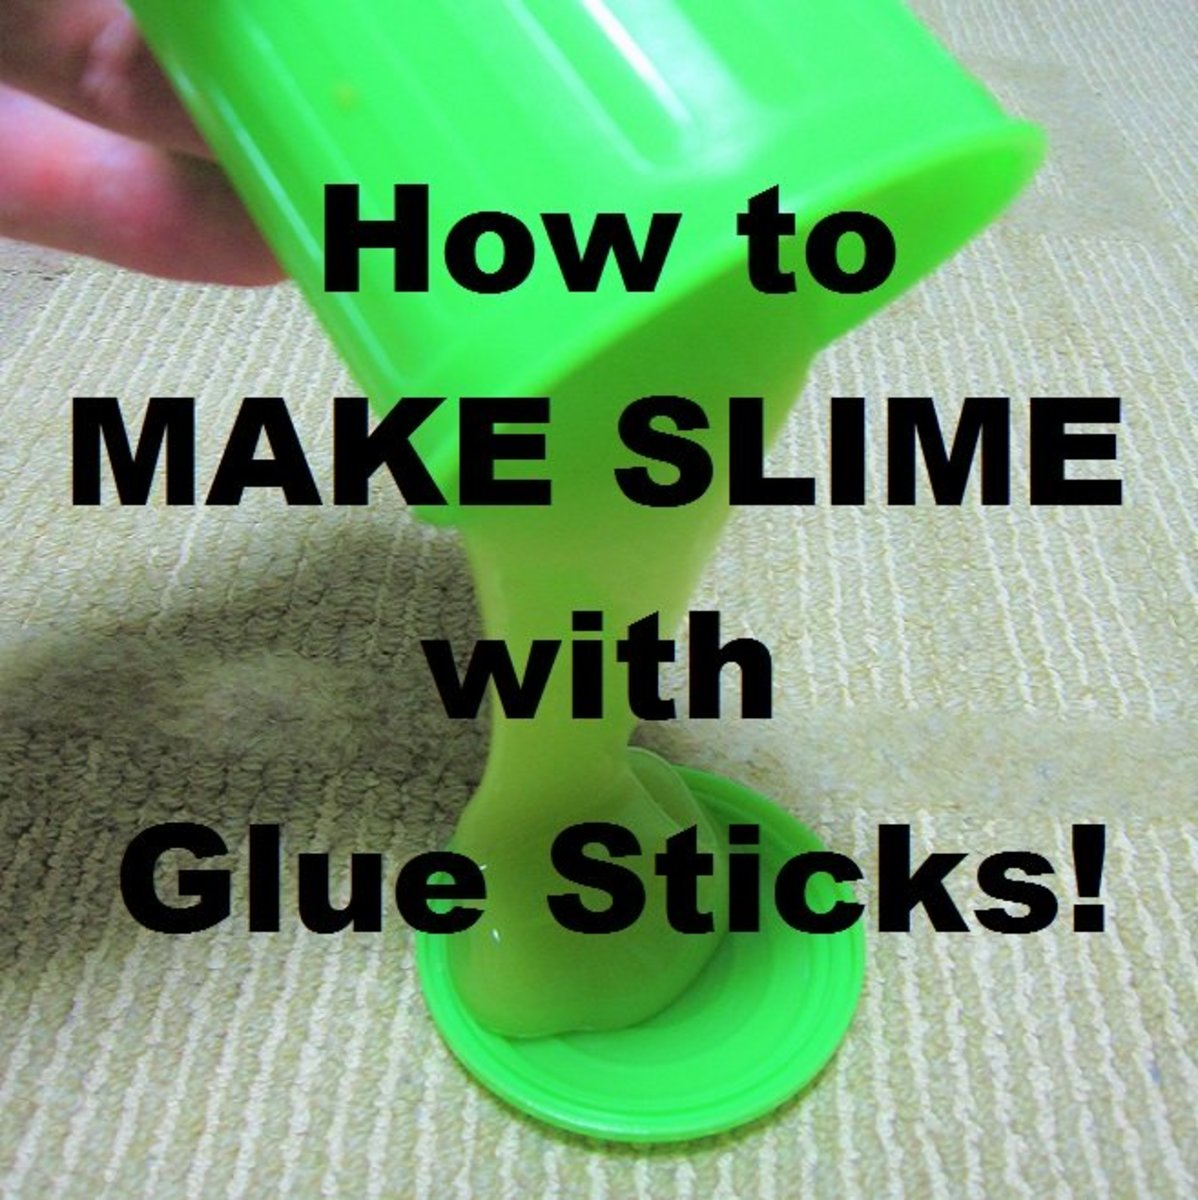 Slime Recipe Book: How to Make Amazing Slime at Home, Best Slime